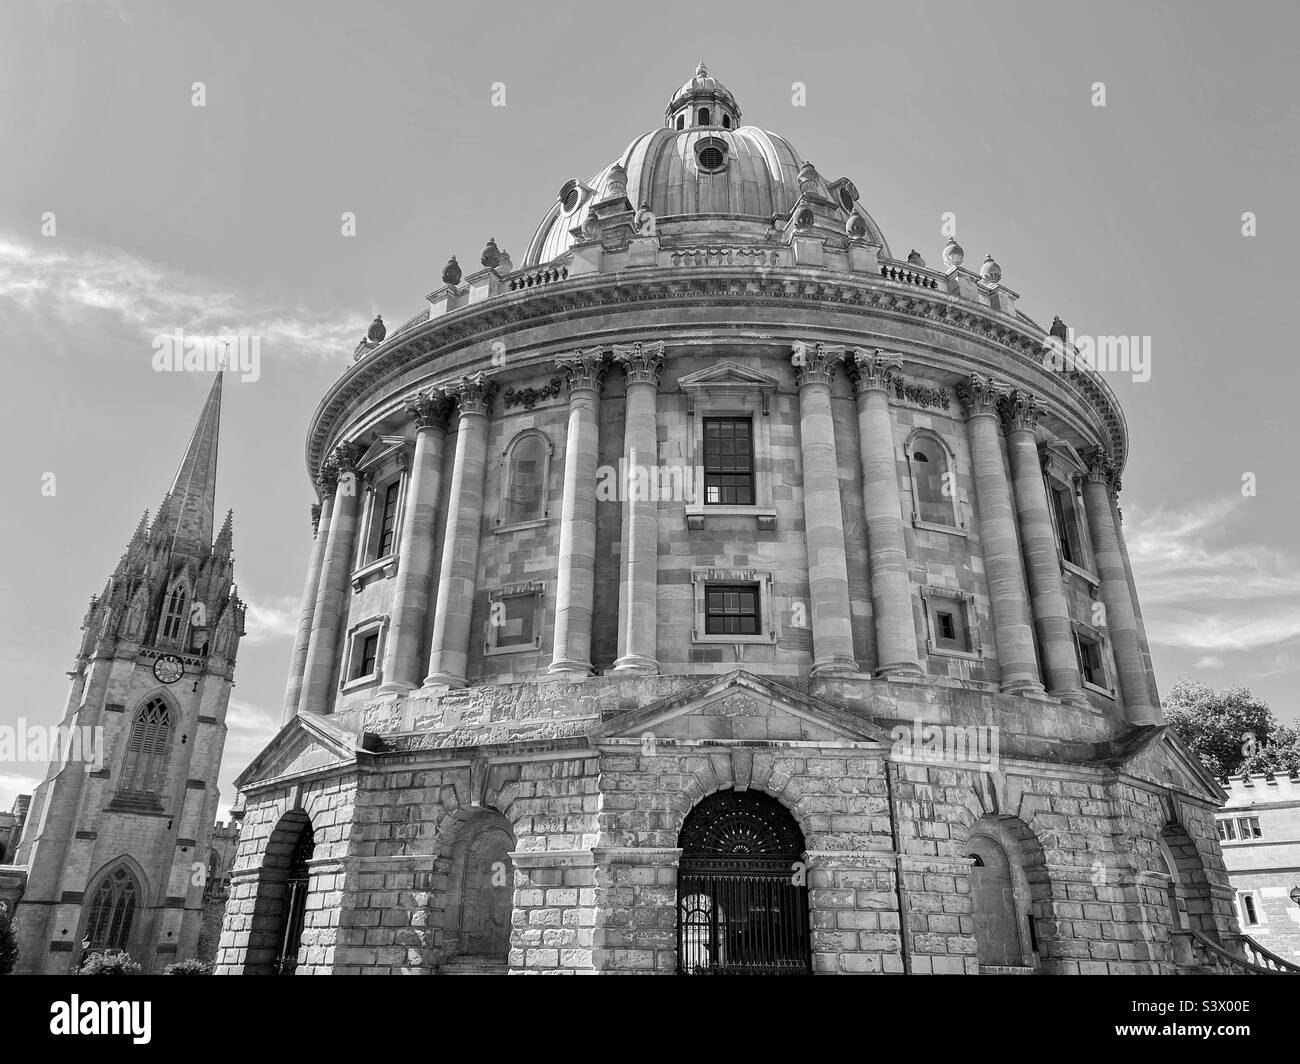 The Radcliffe Camera building in the University area of Oxford, England. This building is not a camera but a library and reading area for the university students. Photo ©️ COLIN HOSKINS. Stock Photo